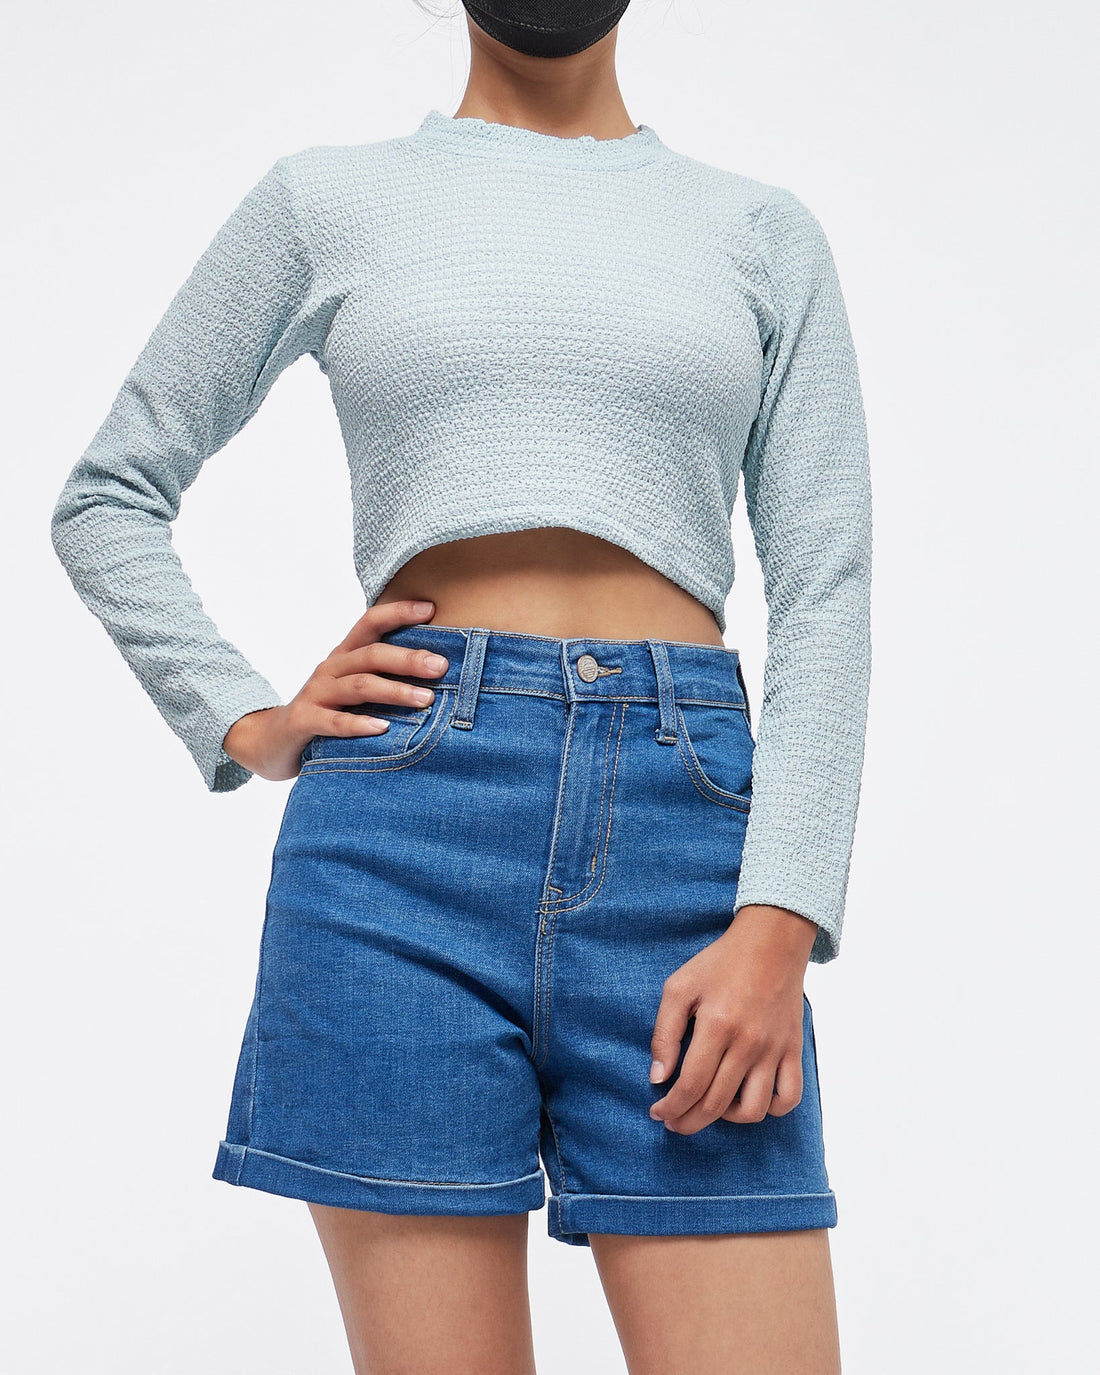 MOI OUTFIT-Lady Crop Top Long Sleeve 14.90